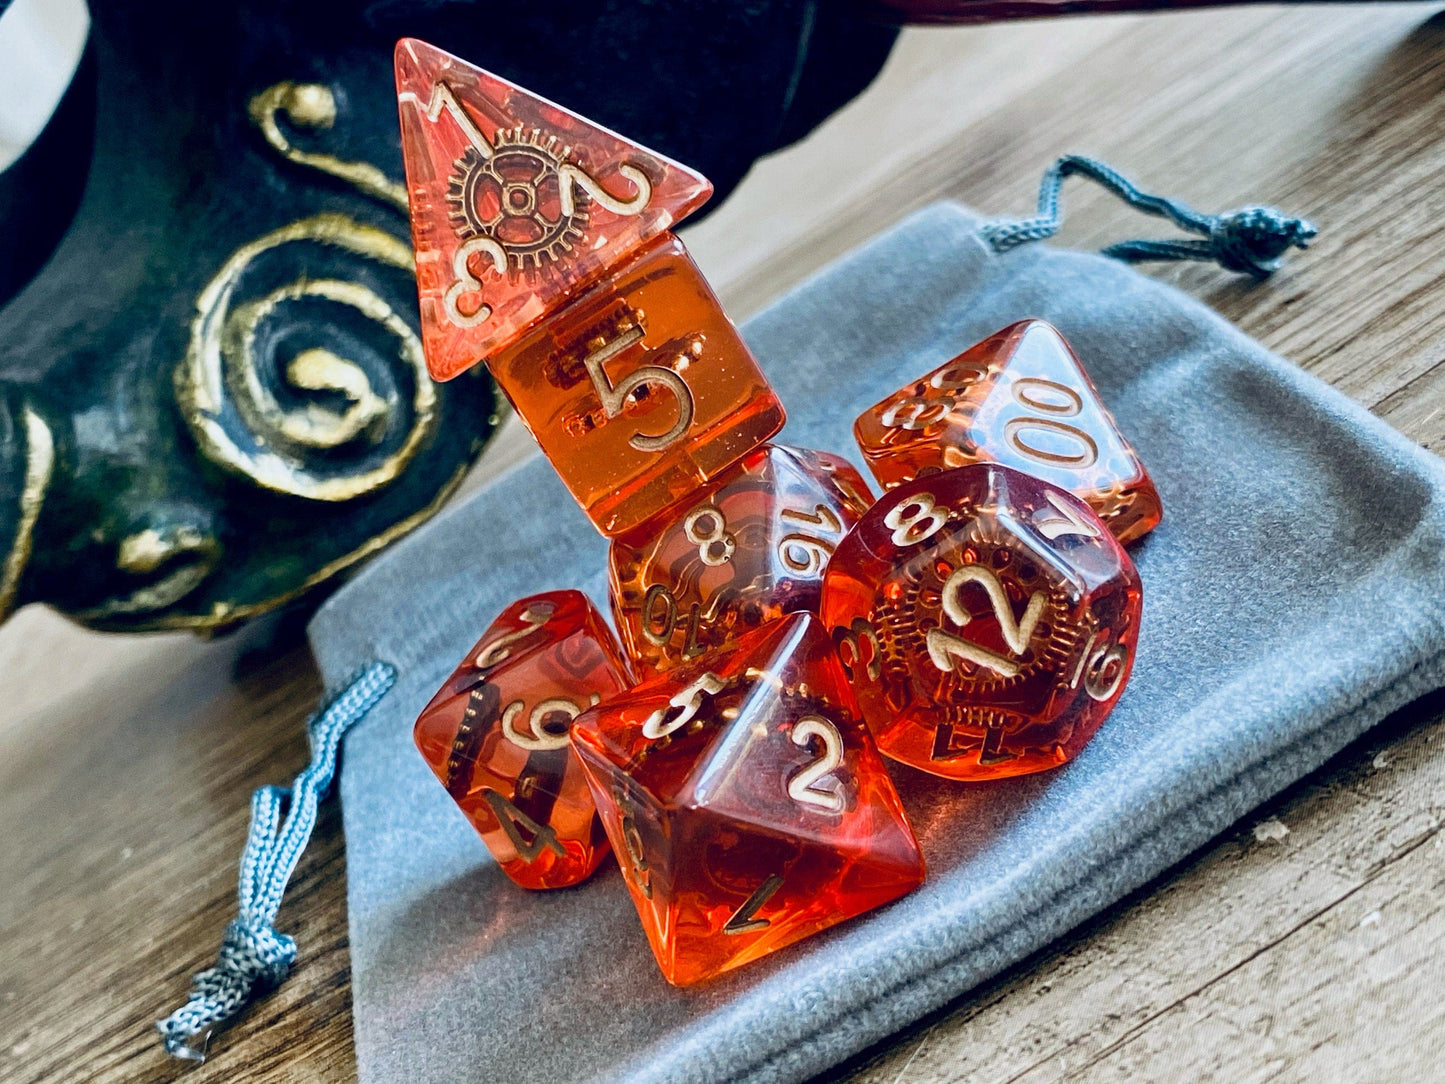 The Crooked Tavern Dice Sets Gear Punk RPG Dice Set | Tiny Steampunk Gears Inside!